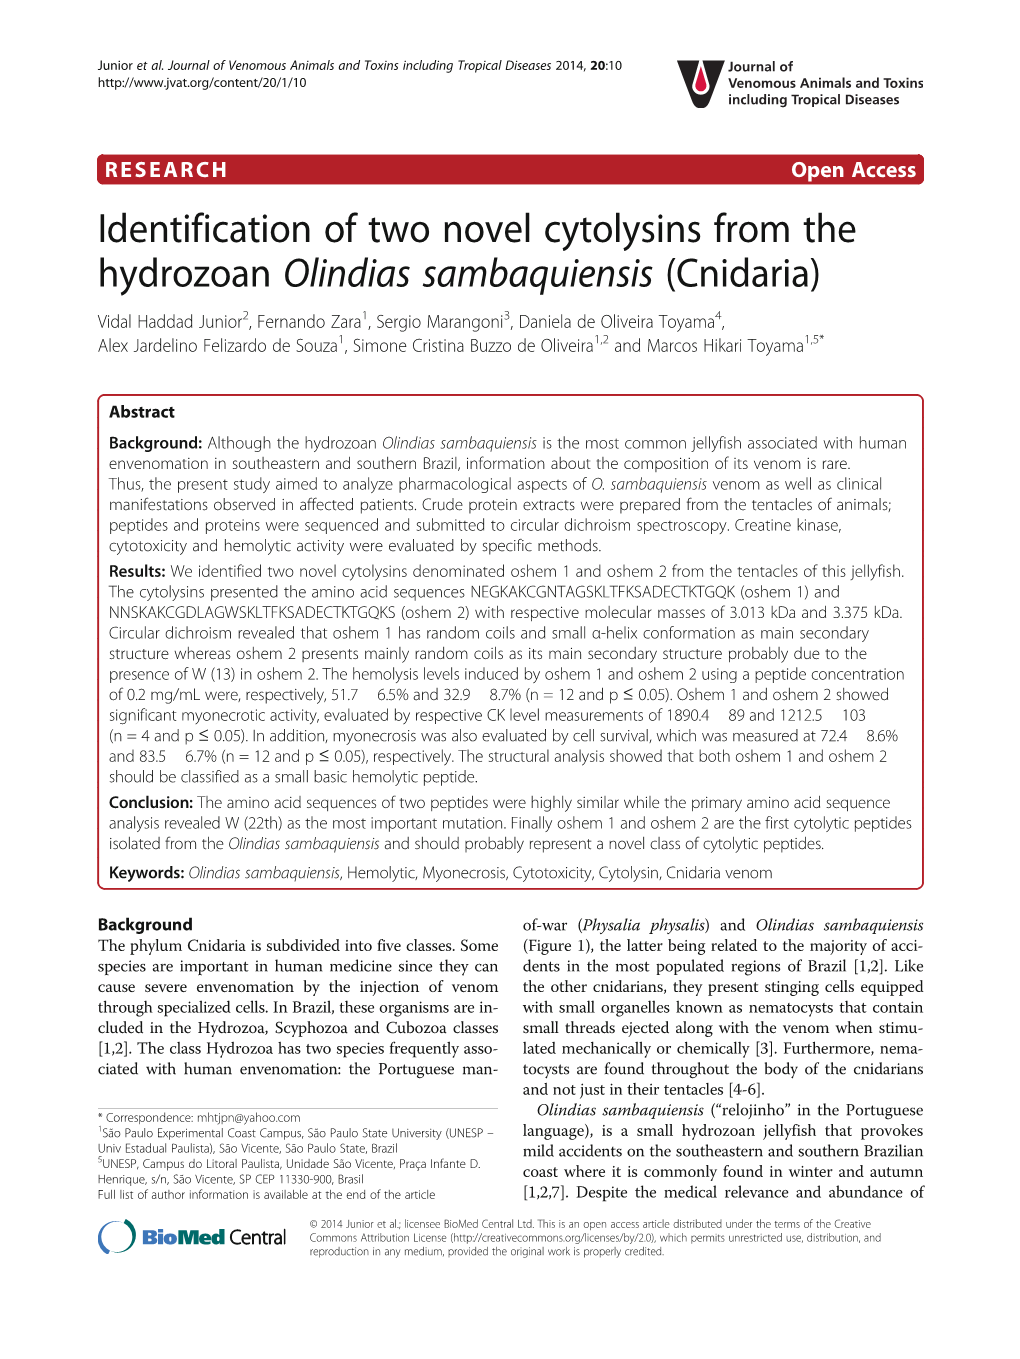 Identification of Two Novel Cytolysins from the Hydrozoan Olindias